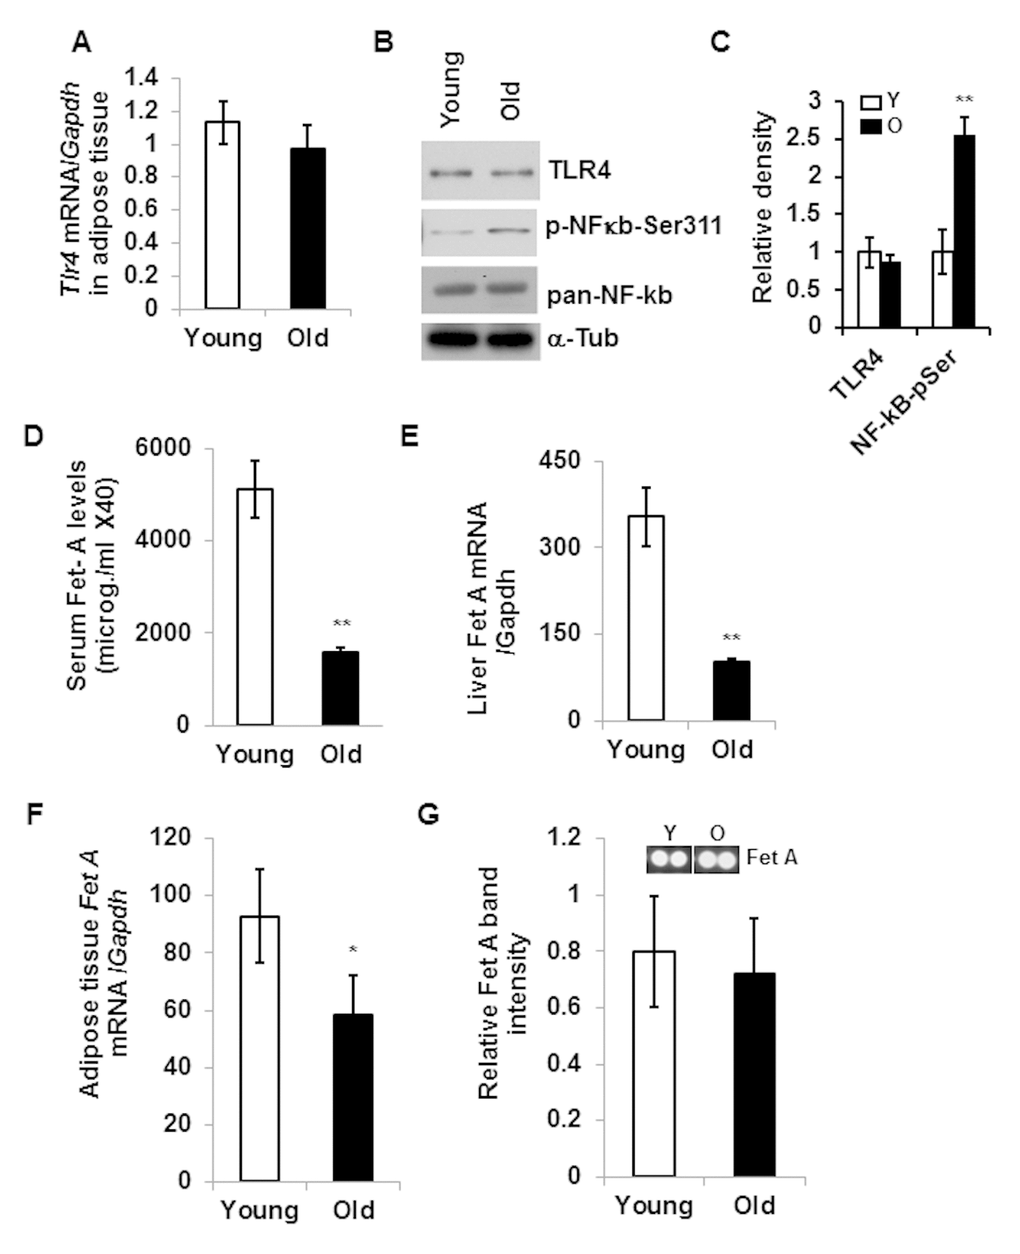 Aging associated adipose tissue inflammation is not correlated with the expression of TLR4 or its endogenous ligand, Fet A. Relative expression of Tlr4 gene in the adipose tissue of young or old mice at mRNA (A) and protein (B) levels. NF-κB activation was determined by western blotting using NF-κB-phospho-serine311 antibody (B). The relative density is expressed in (C). (D) Serum Fet A levels in young and old mice. (E) Relative mRNA expression of Fet A in the liver. mRNA expression of Fet A (F) and protein levels (G) in the adipose tissue of young and old mice. Data represented in bar diagrams are mean + SD value of relative mRNA expression from three independent experiments where total RNA was extracted from gonadal fat pads of young (n=5) and old (n=5) mice and used as a template for one-step qRT-PCR reaction. Protein expressions were determined by western blotting of adipose tissue lysates from young (n=5) and old (n=5) mice. Data presented here are representative image of three independent experiments. The significance levels *pp